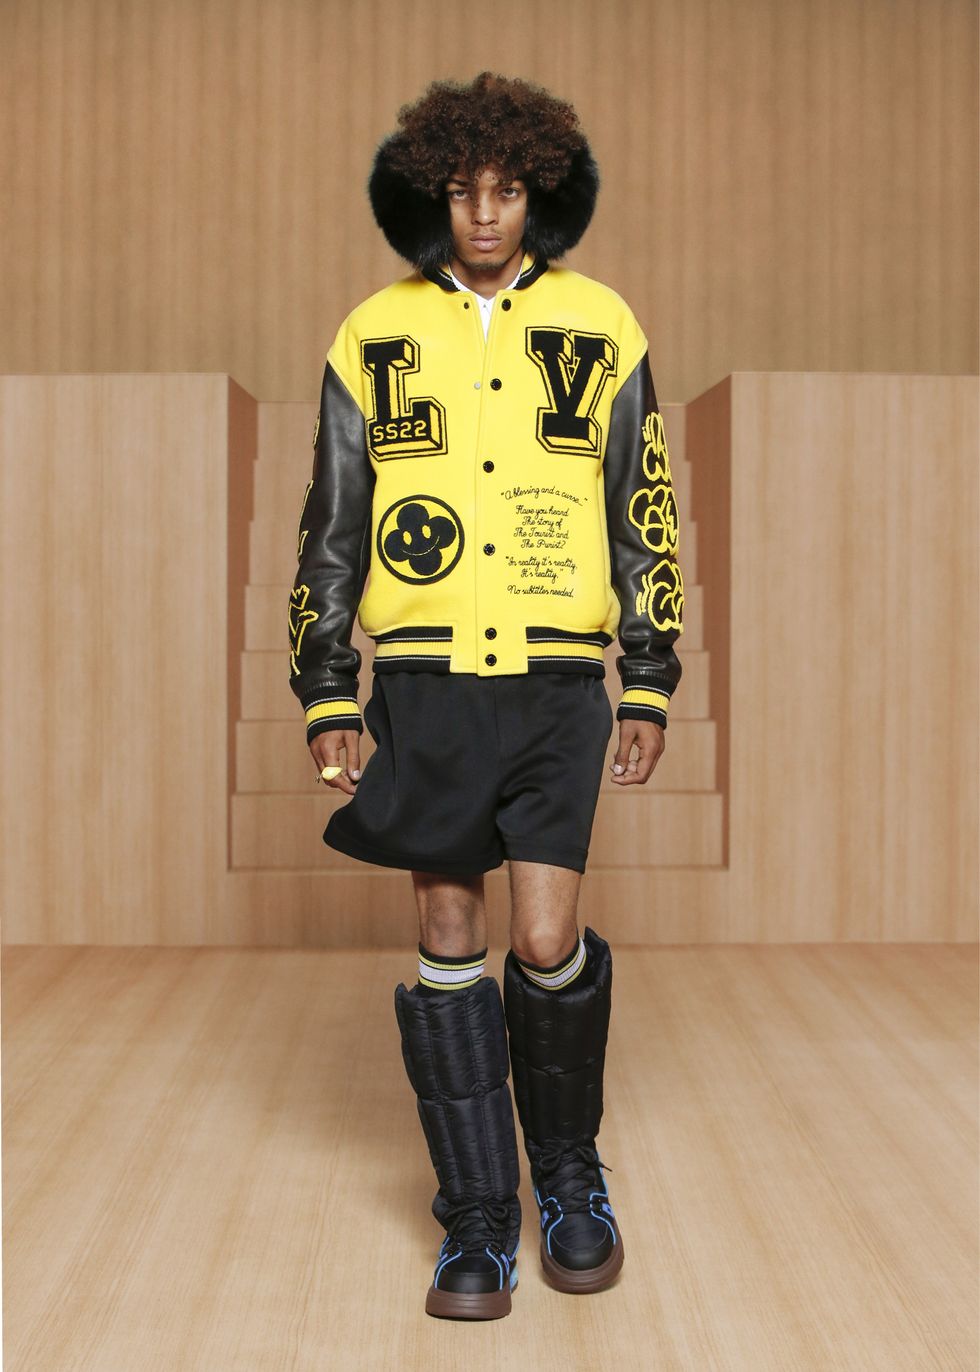 Virgil Abloh Talks Chess, Kung Fu and Gender in Vuitton Show Preview – WWD